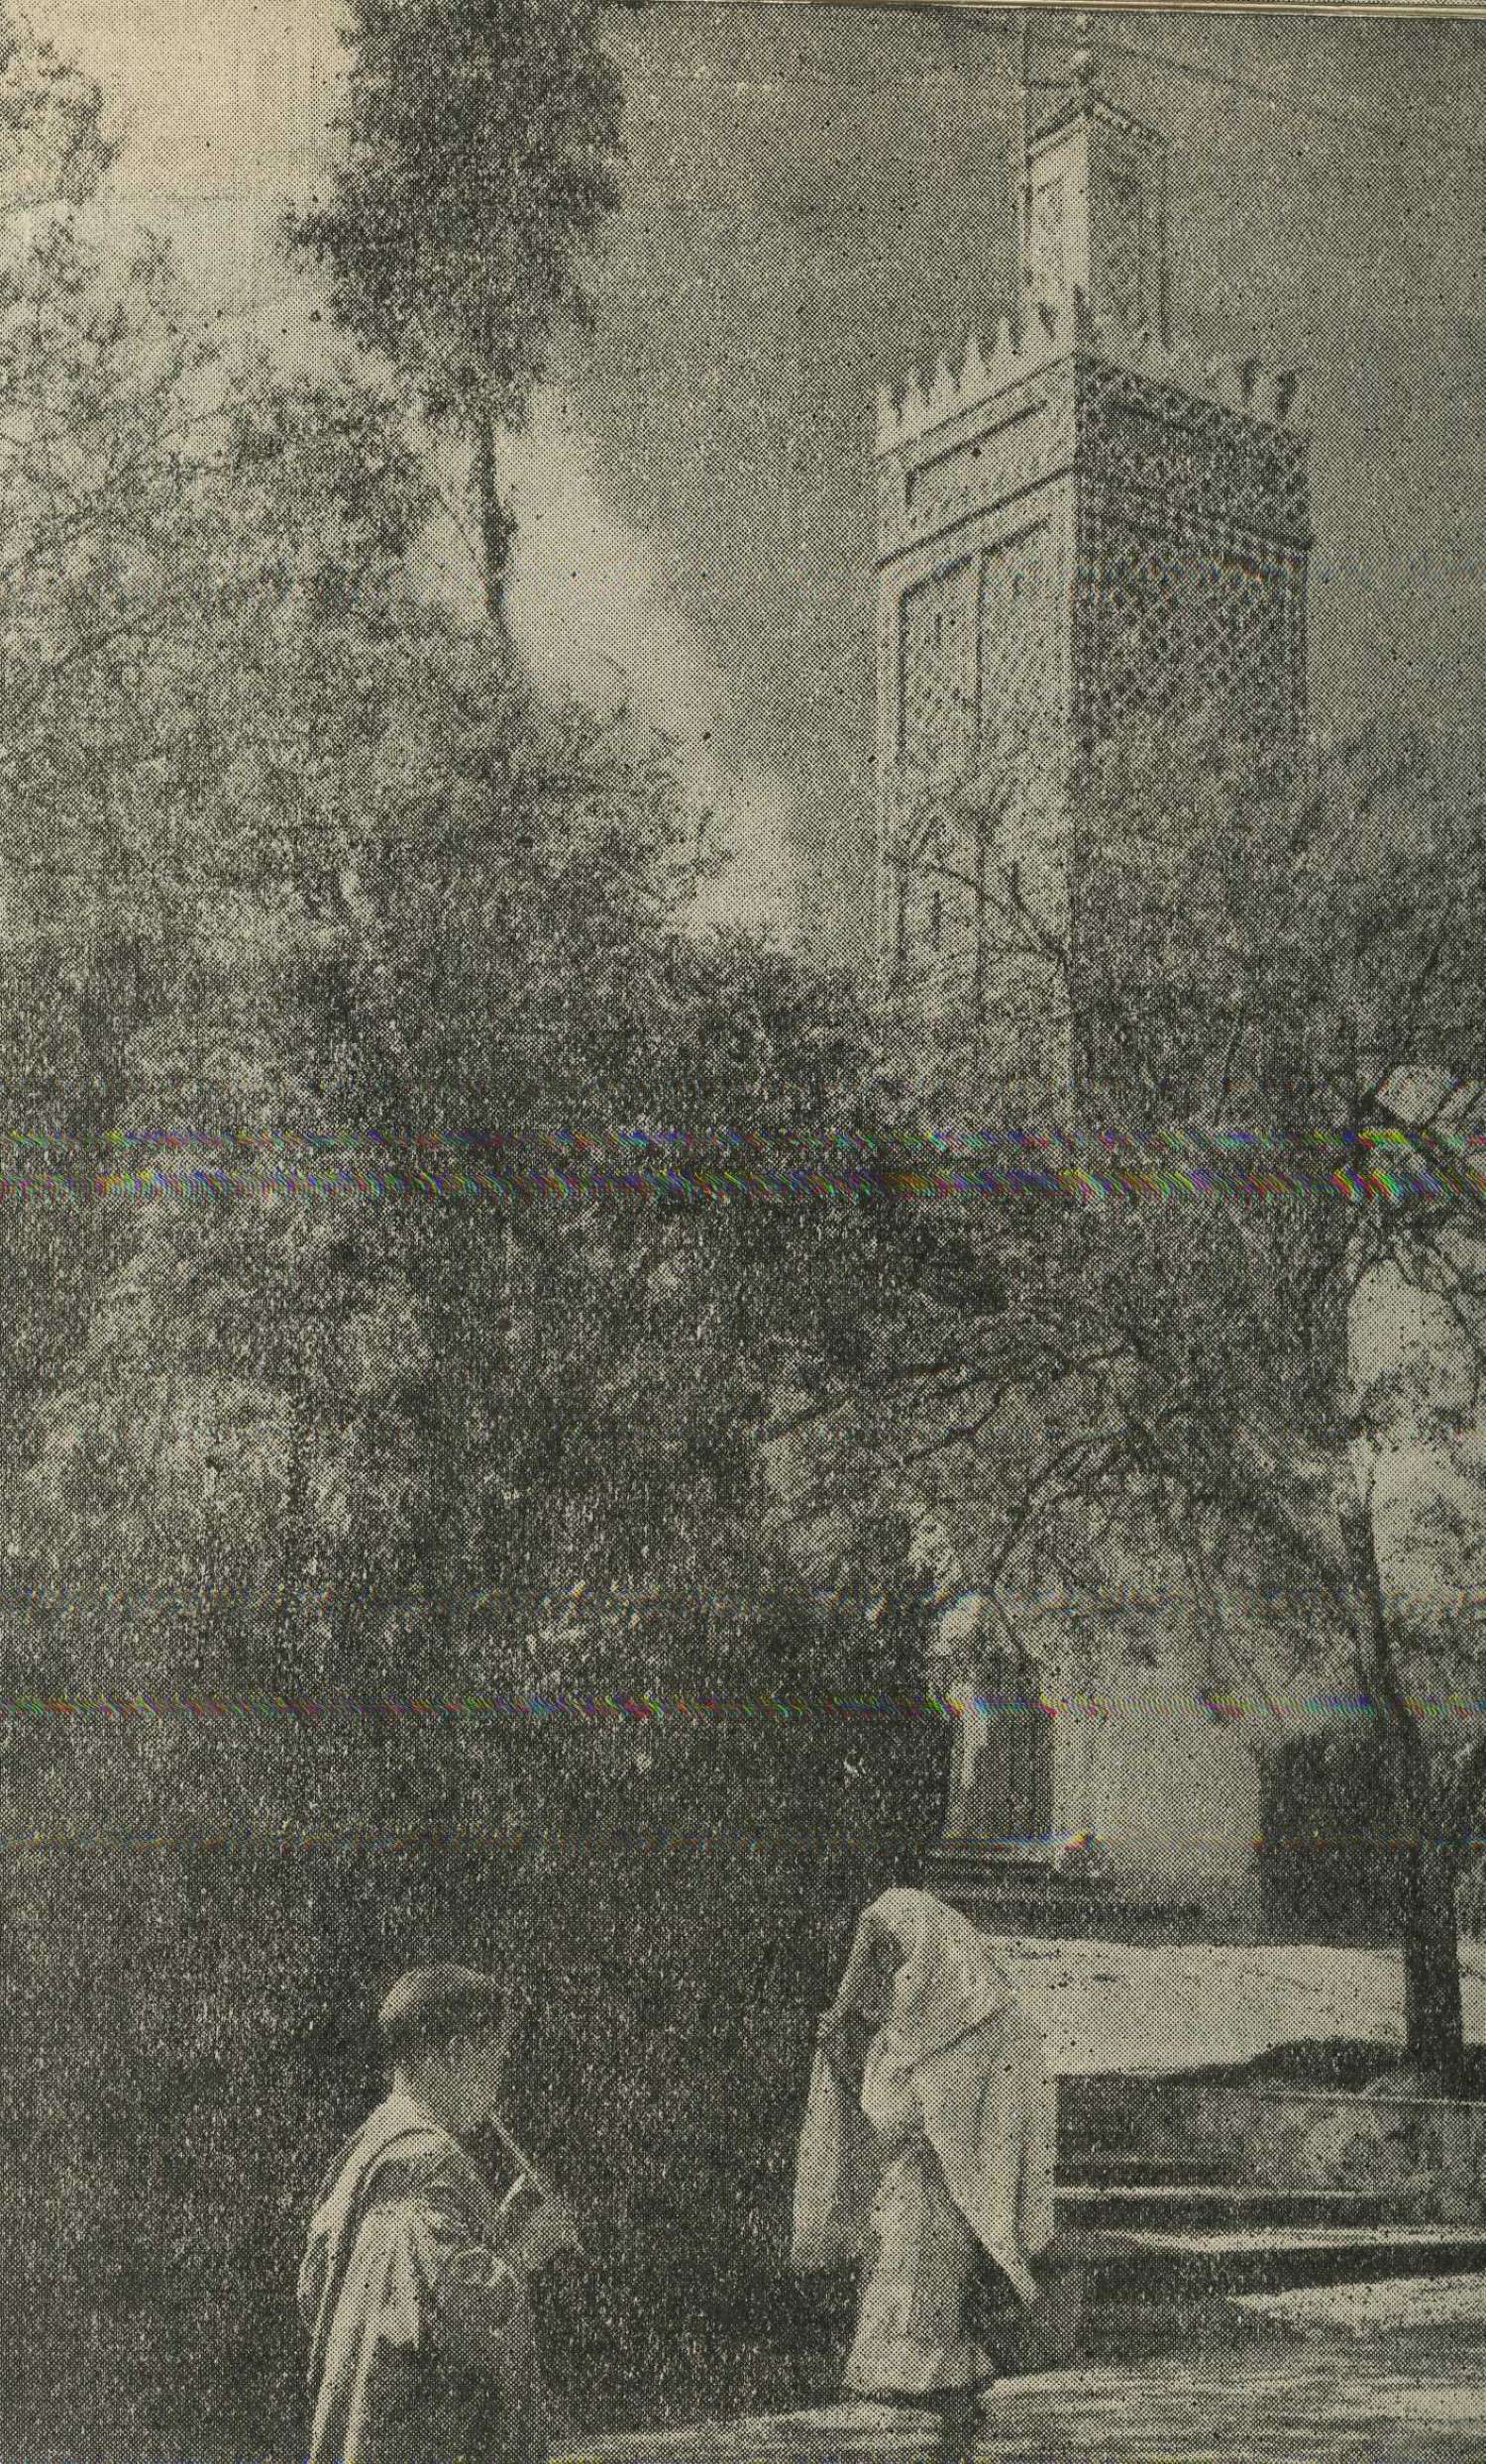 Marshan Mosque and Minaret, covered by trees, figures in foreground